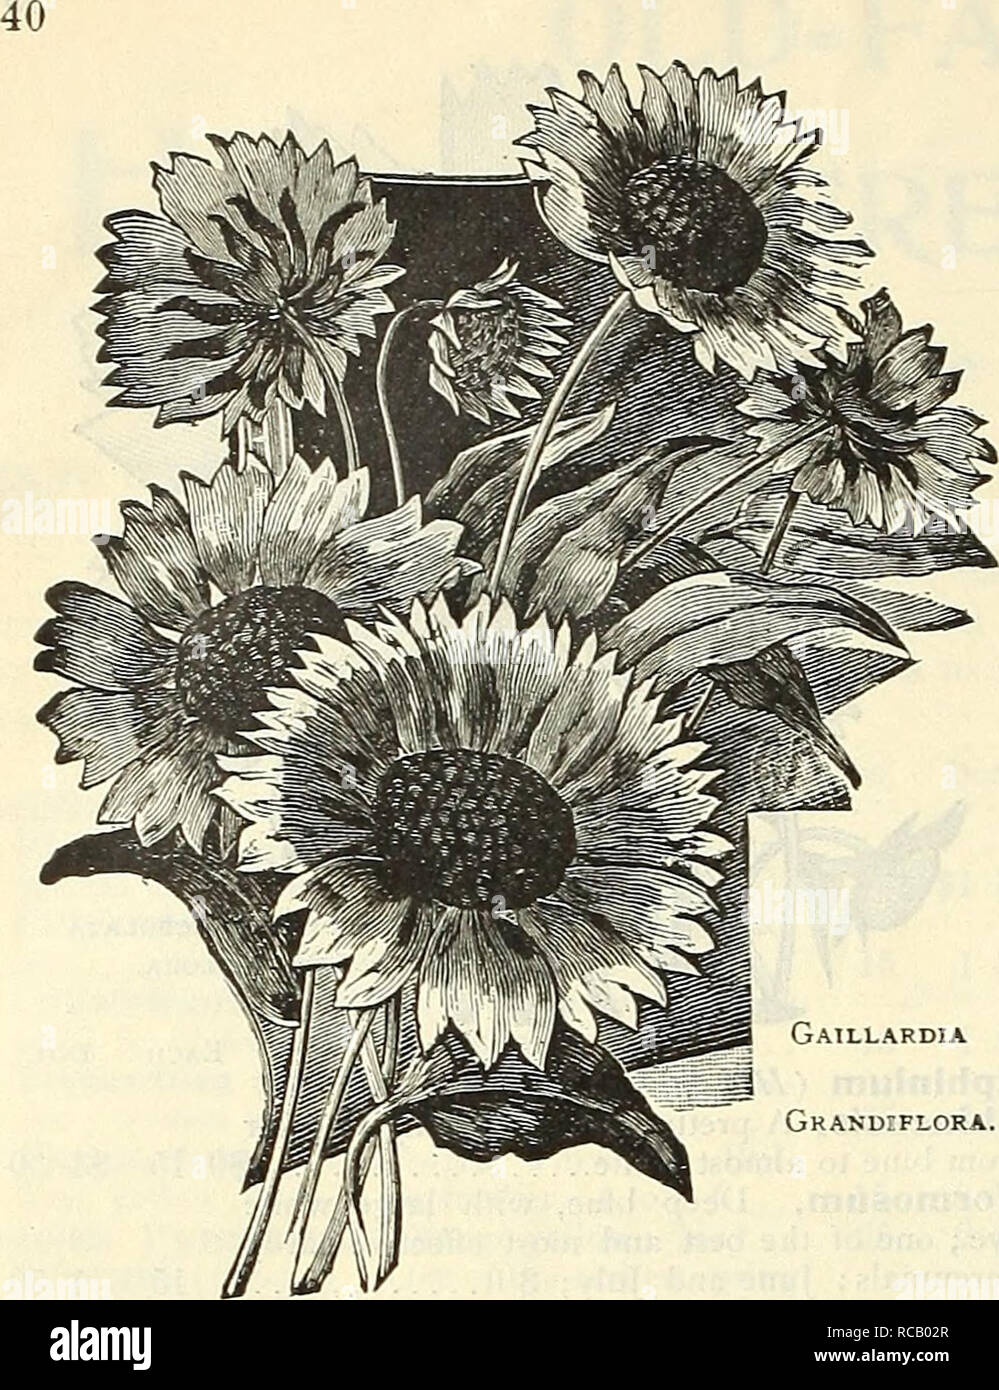 . Dreer's autumn 1902 catalogue. Bulbs (Plants) Catalogs; Flowers Seeds Catalogs; Gardening Equipment and supplies Catalogs; Nurseries (Horticulture) Catalogs; Fruit Seeds Catalogs. Gaillardia Grandiflora. HARDY PERENNIALS—Continued. Each Gaillardia Grandiflora (Blanket Flower). One of the showiest hardy perennials, blooming throughout the entire season ; large, gorgeous flowers of crimson and gold ; 2ft $0 15 Geranium Sanguineum {Crane's Bill). Of compact habit, with bright crimson-purple flowers during summer and autumn ; 18 inches 15 Sanguineum Album. Pure white 15 Gillenia Trifoliata {Bowm Stock Photo